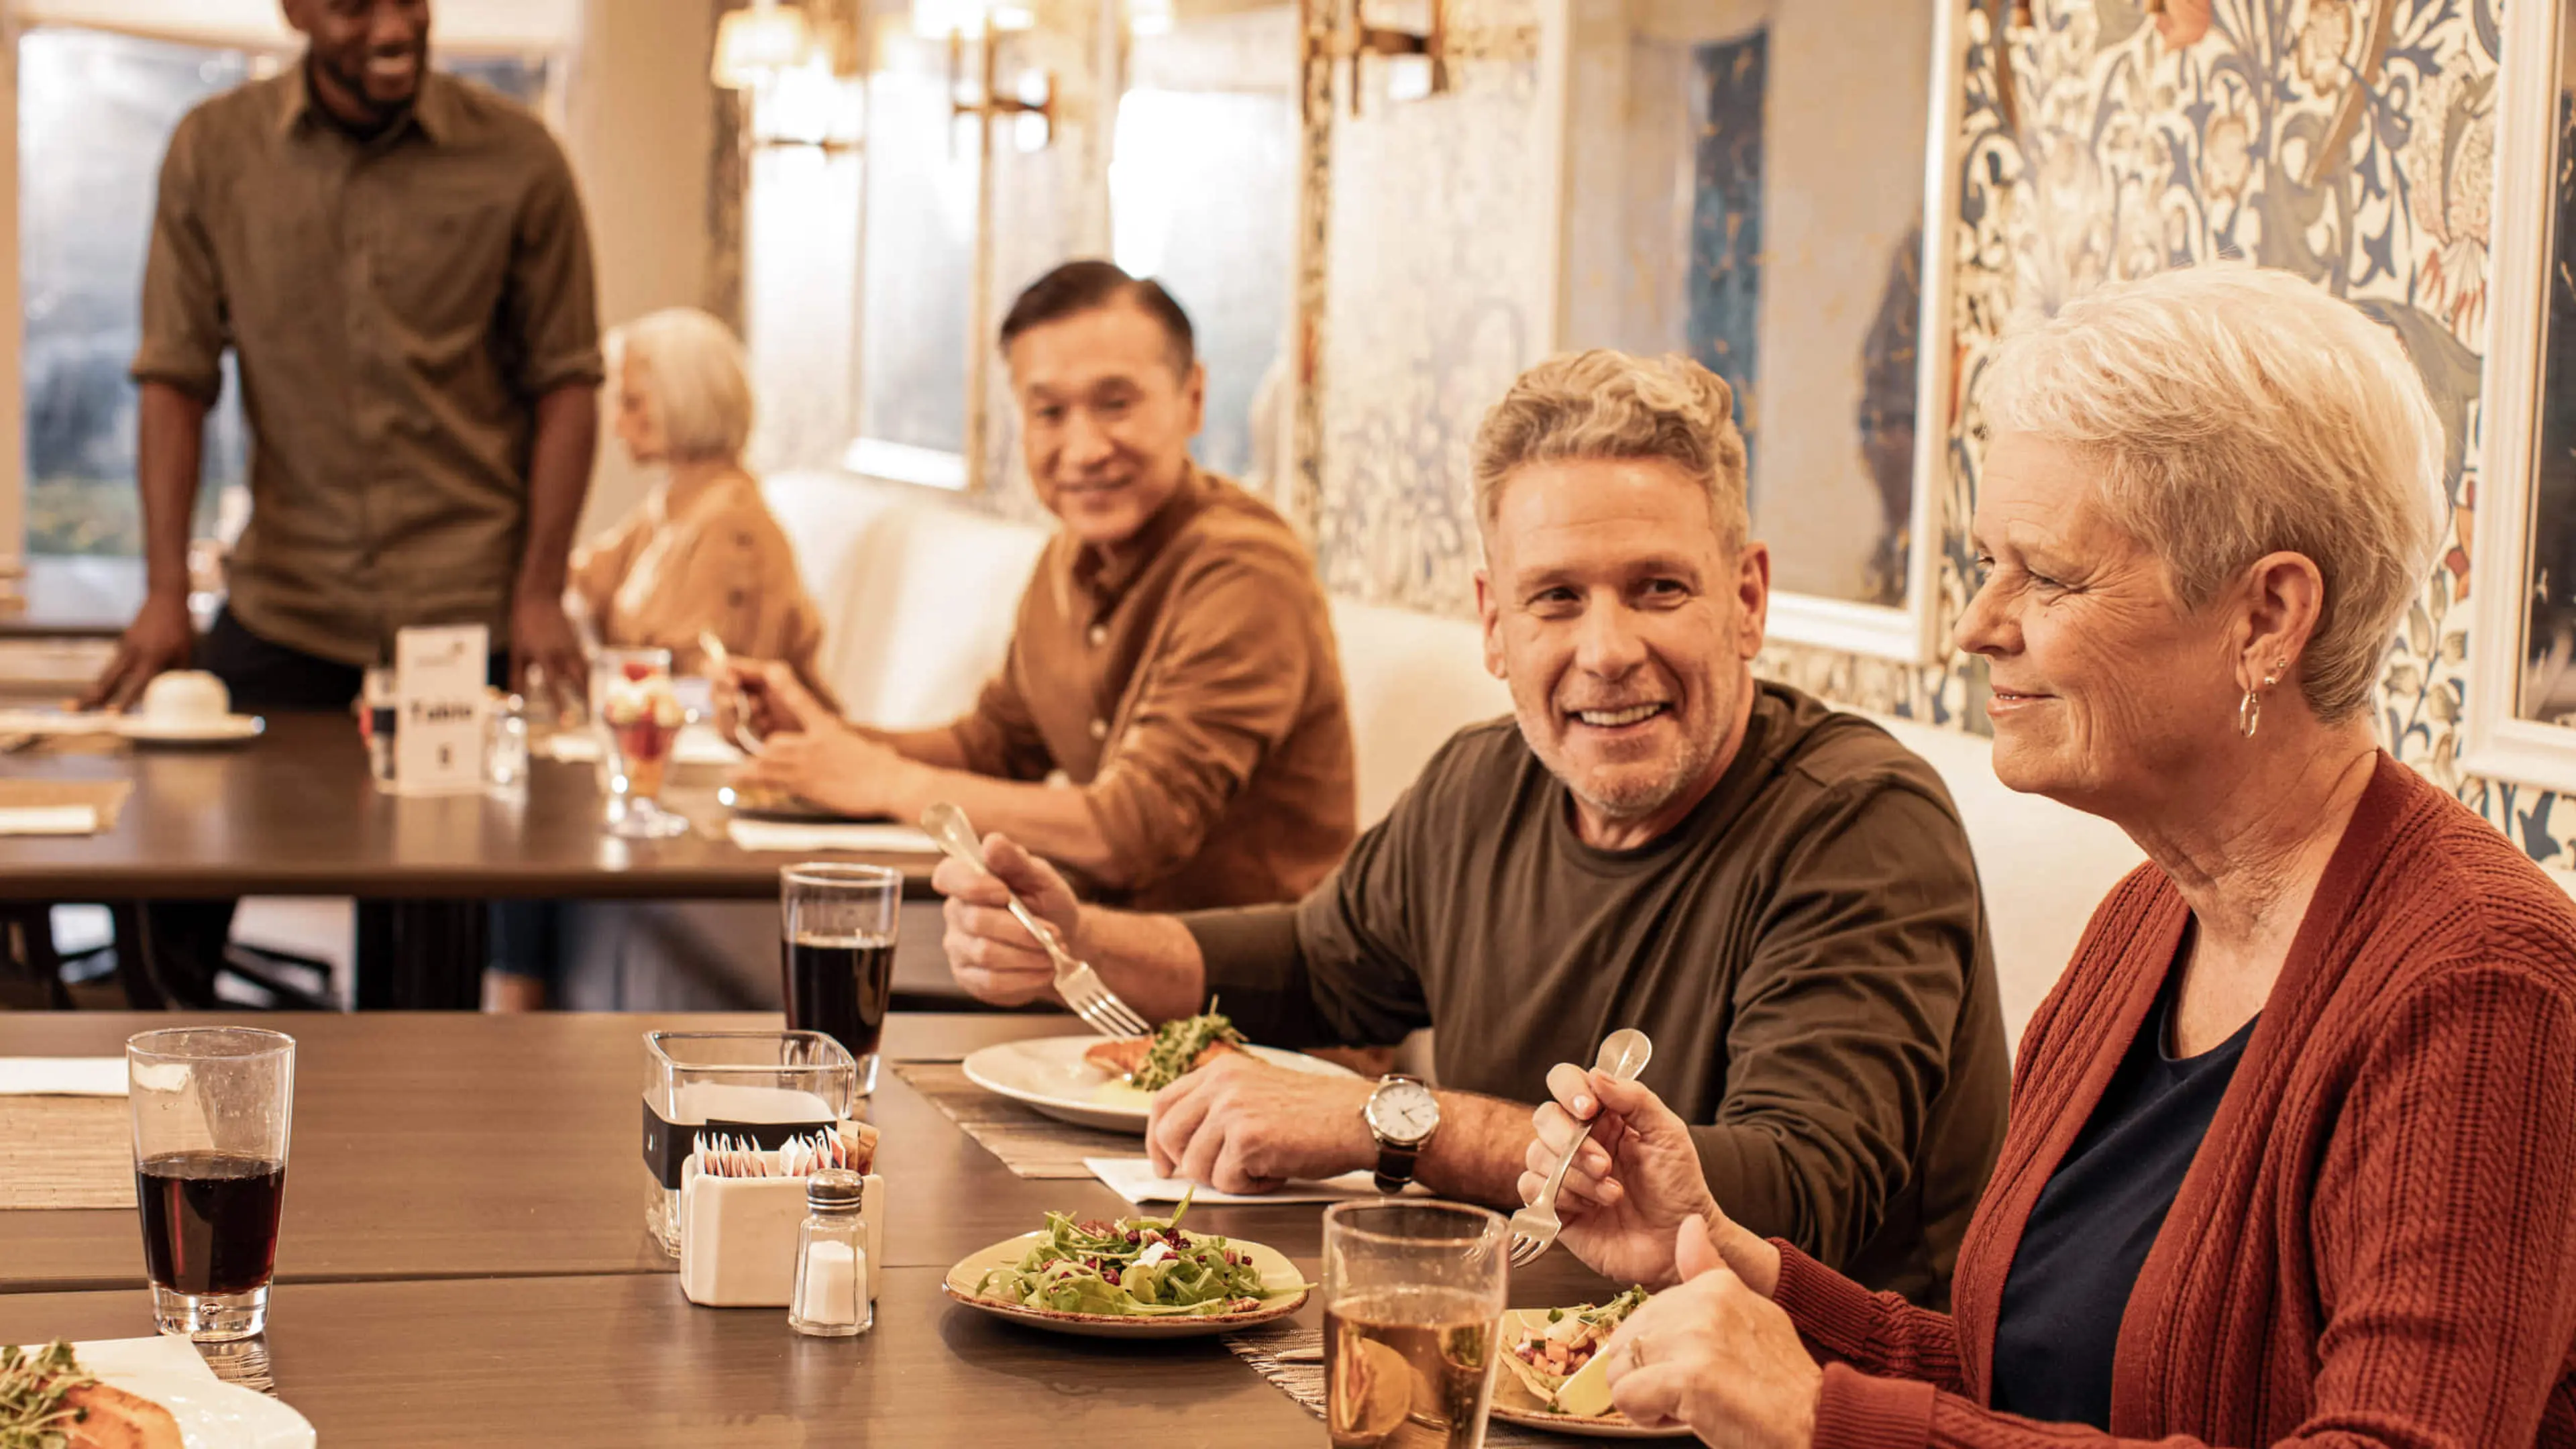 Older adults enjoying a meal in a common dining room